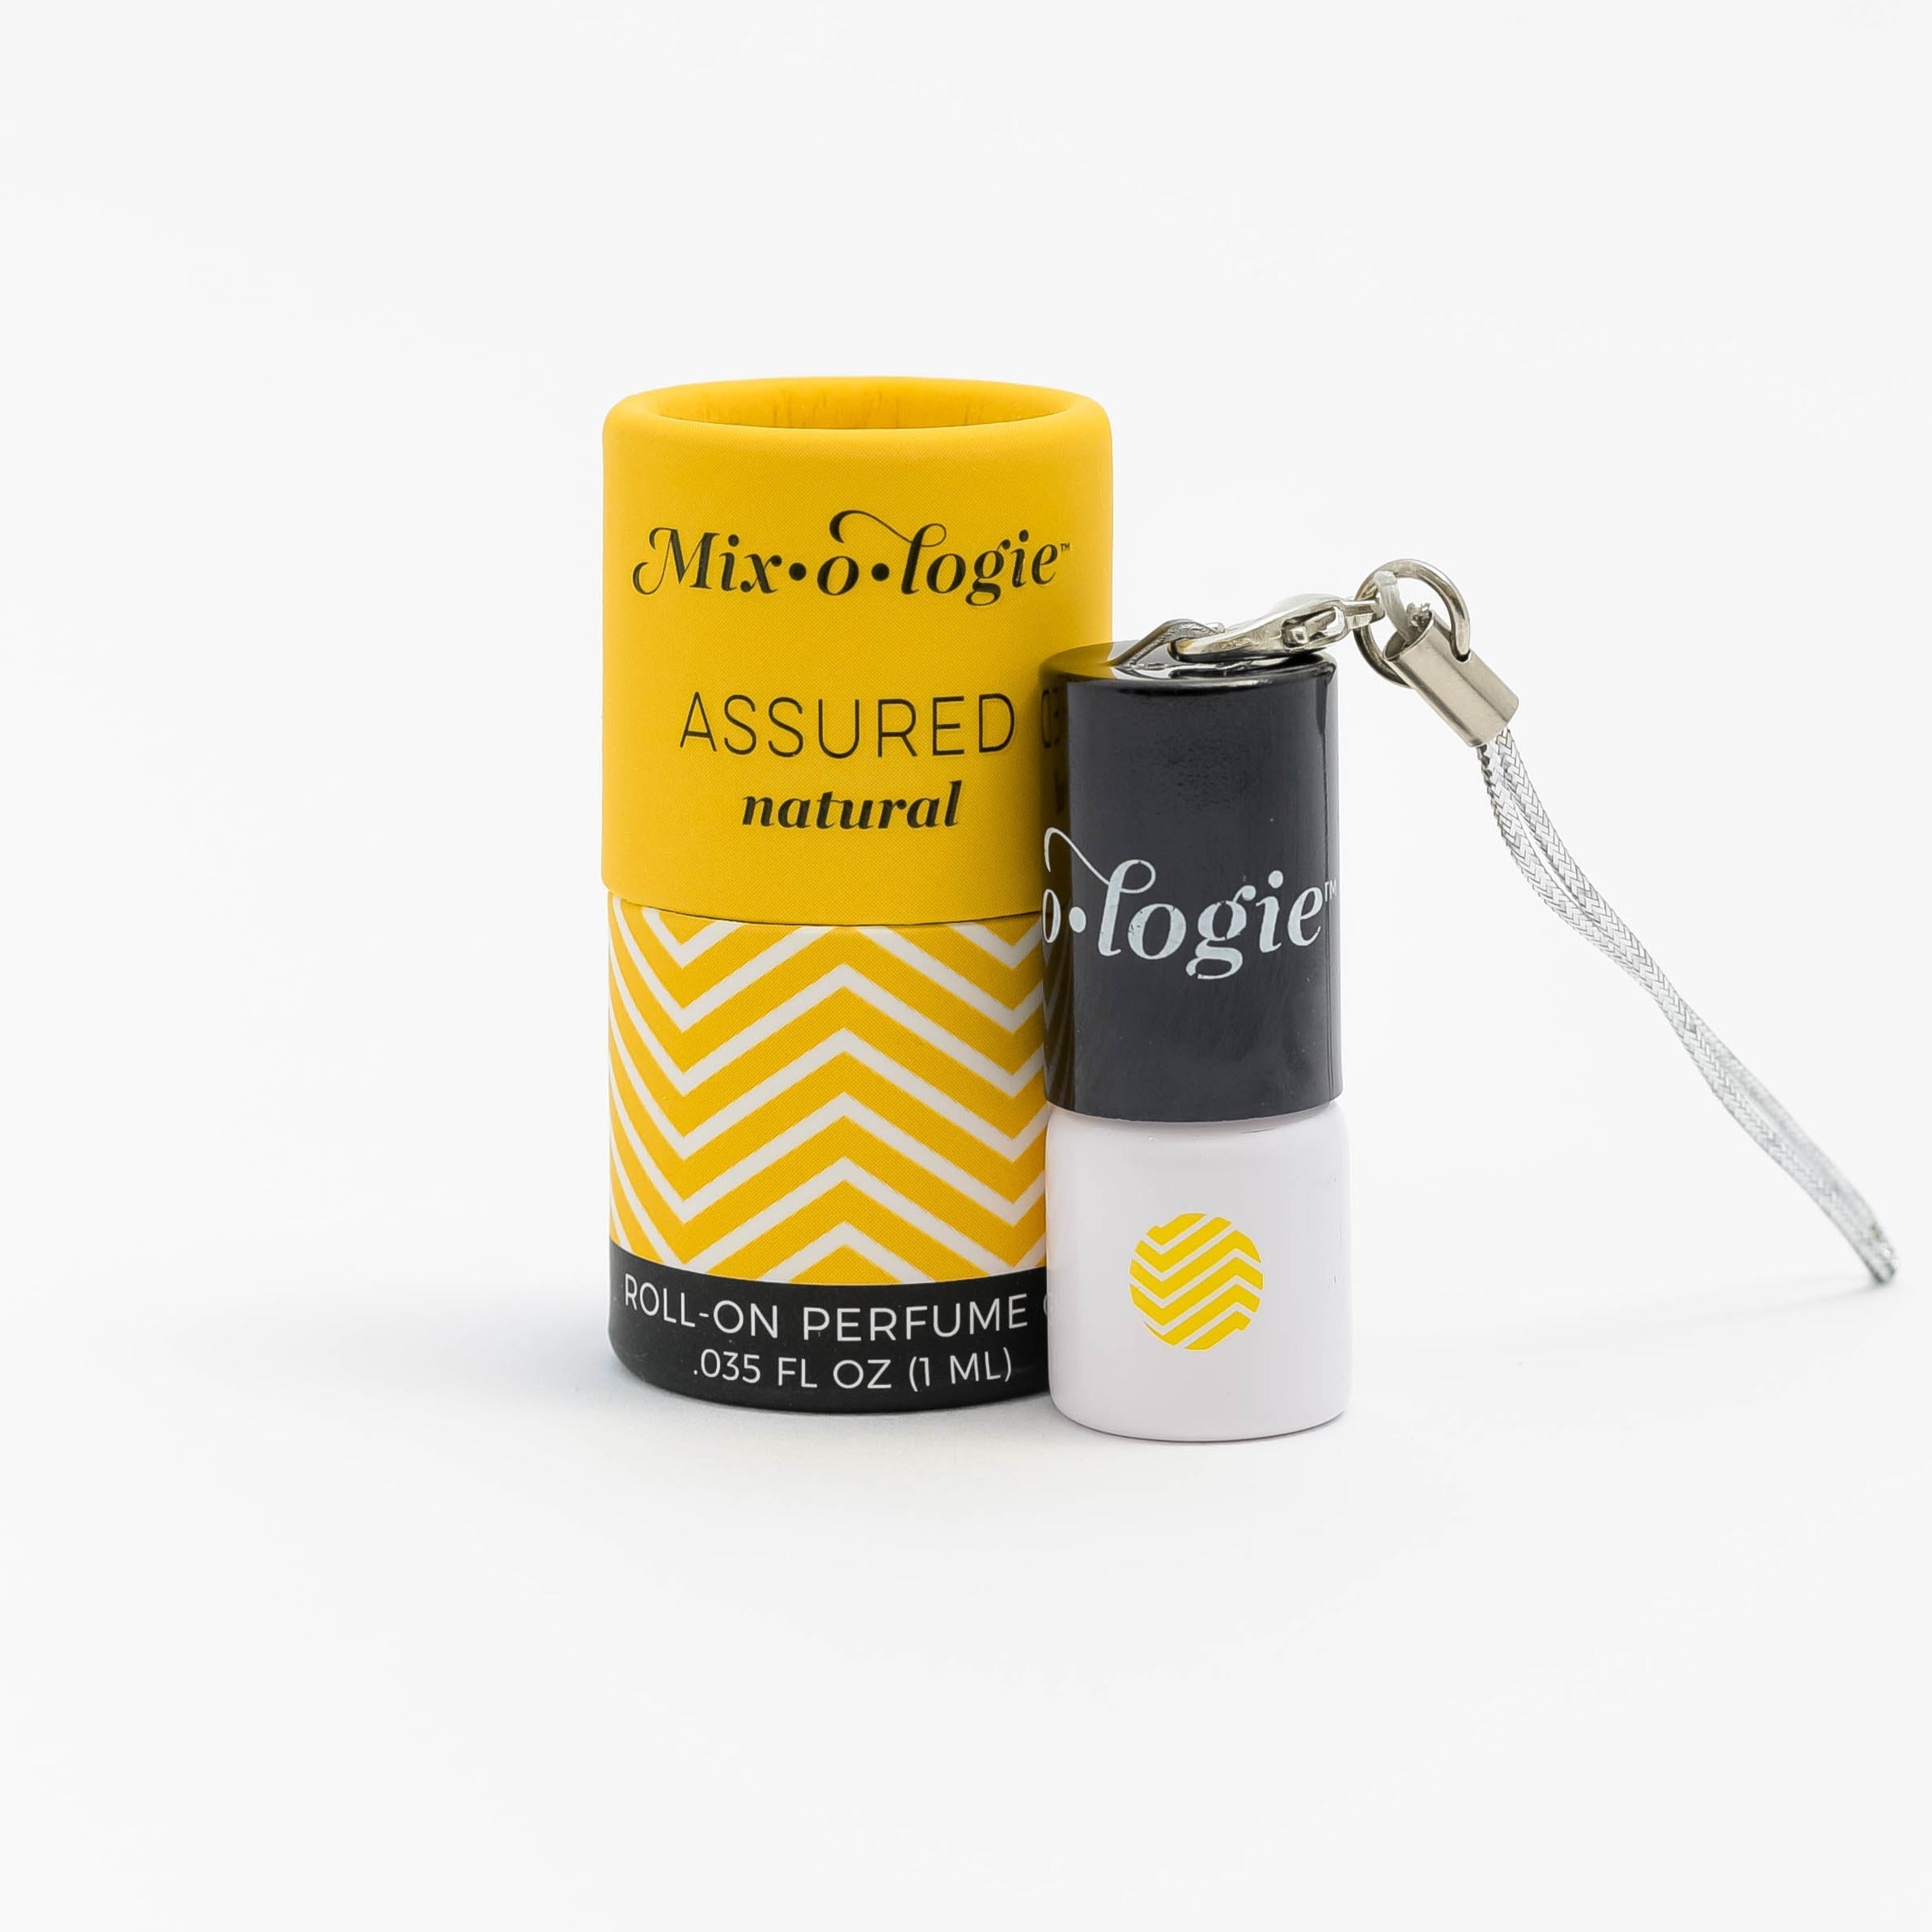 Assured (Natural) mini white cylinder rollerballs with black top and keychain attachment with mustard chevron pattern has .035 fl oz or 1 mL. Mustard cylinder packing tube with mustard chevron pattern. Roll-on perfume oil. Mini rollerball and cylinder tube pictured with a white background